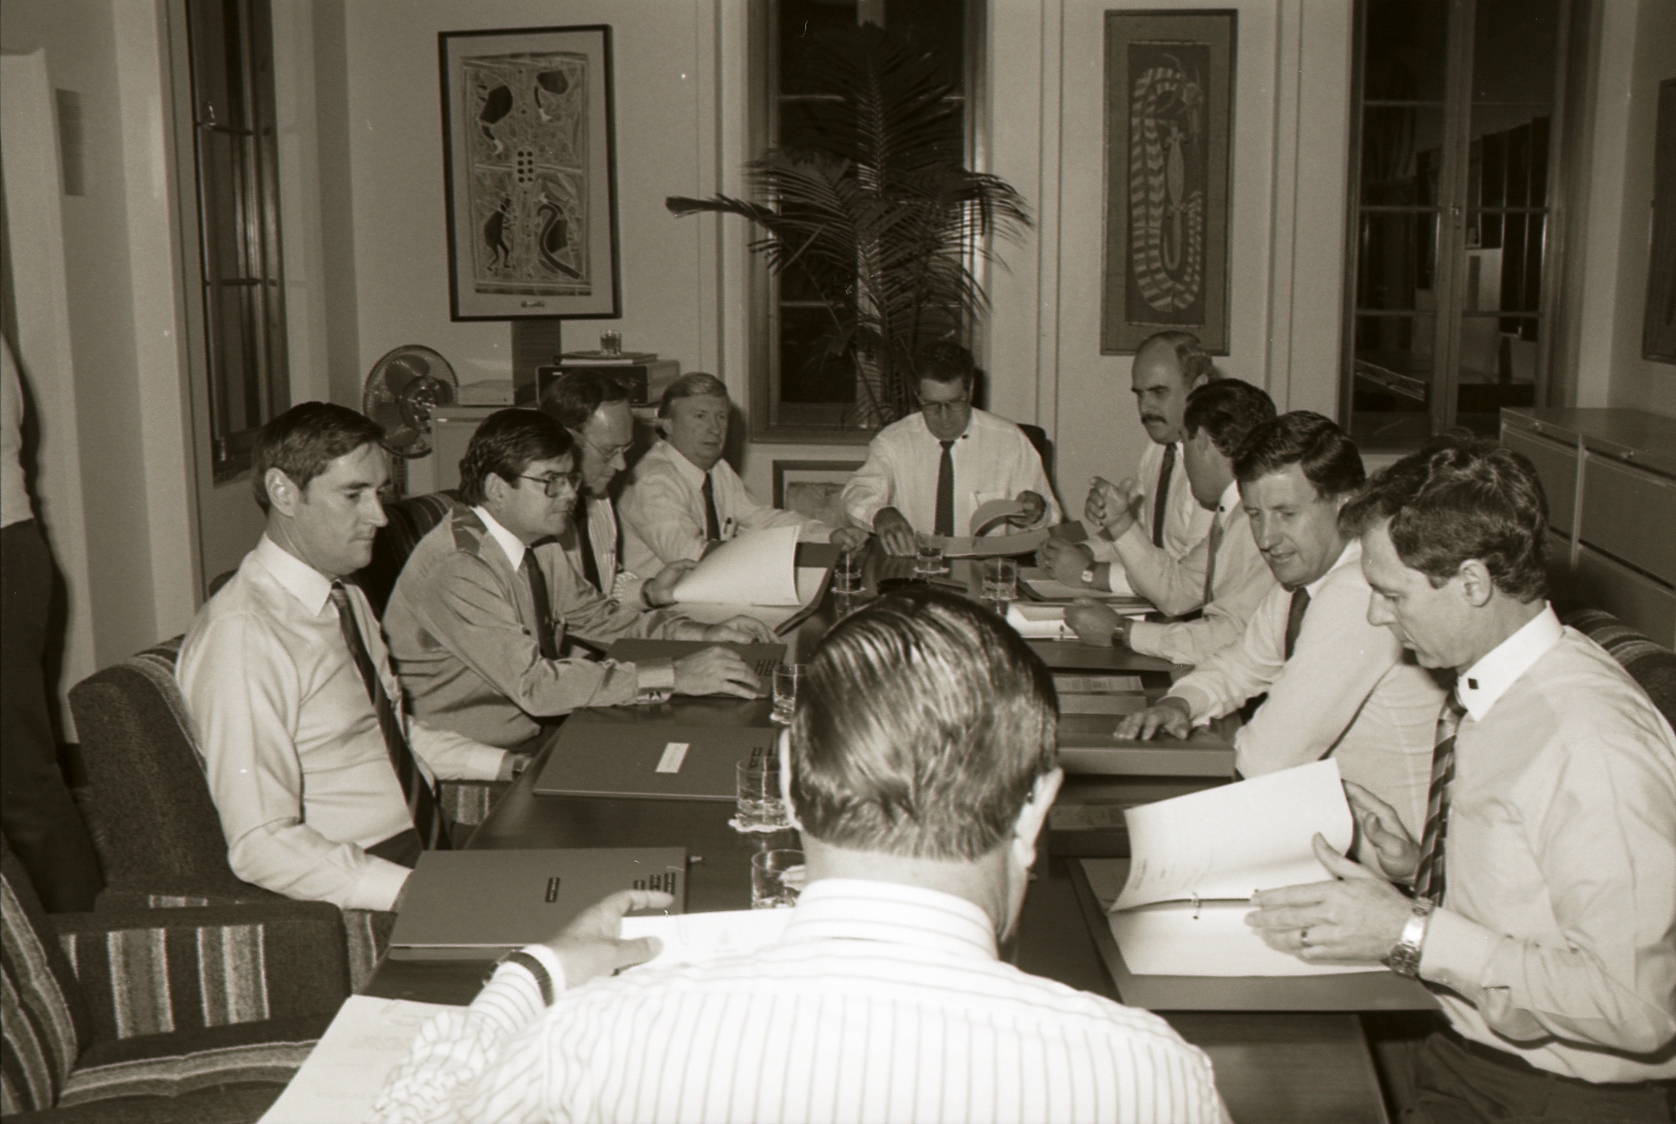 [New Executive Council meeting, 14 July 1988] Image courtesy of Northern Territory Archives Service, Department of the Chief Minister, NTRS 3823 P1, BW 2735, Item 7